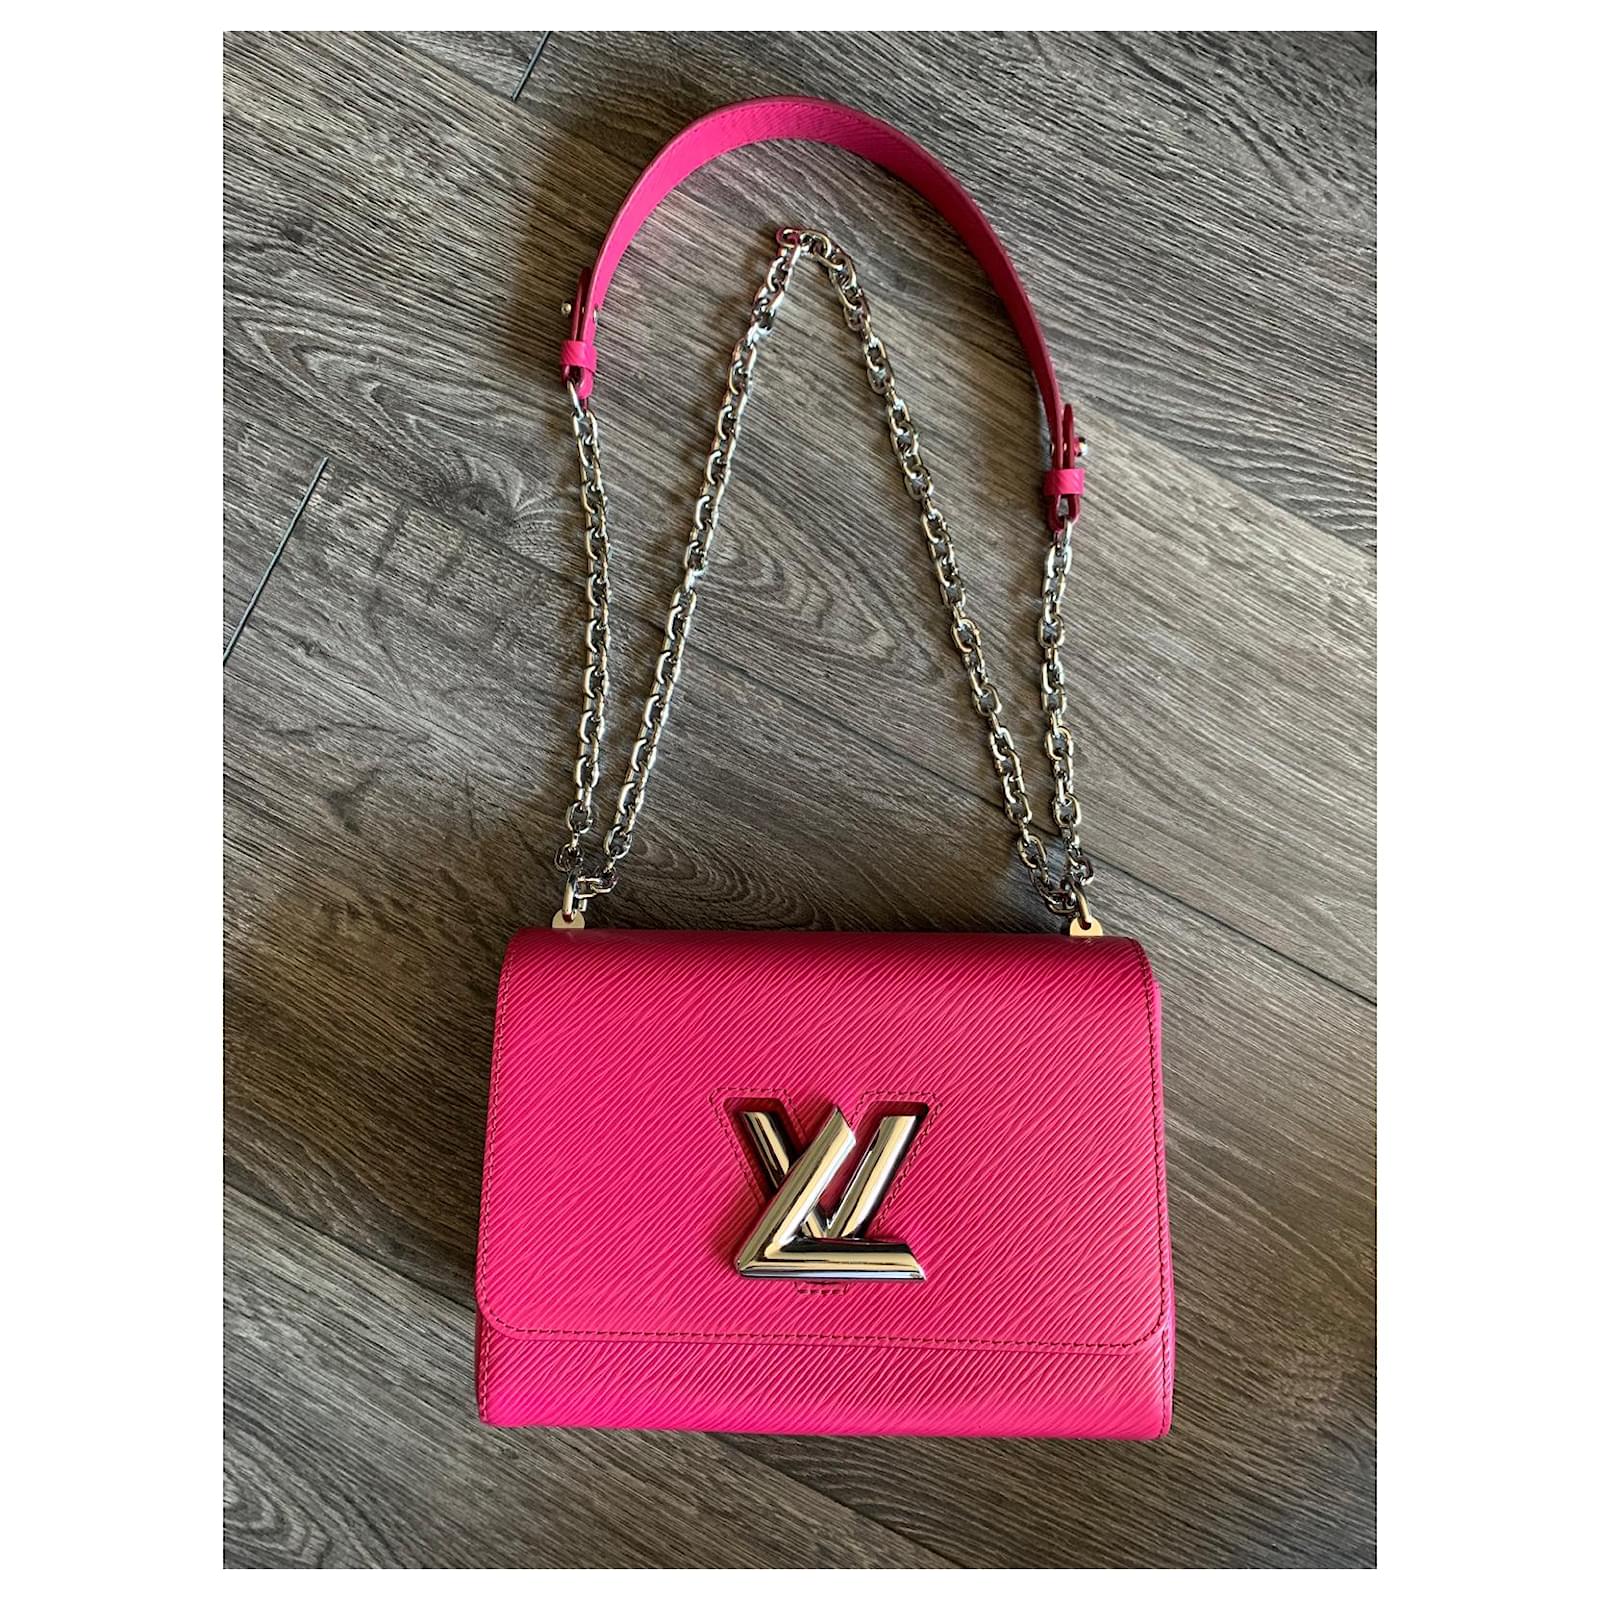 Louis Vuitton - Authenticated Twist Handbag - Leather Pink For Woman, Very Good condition